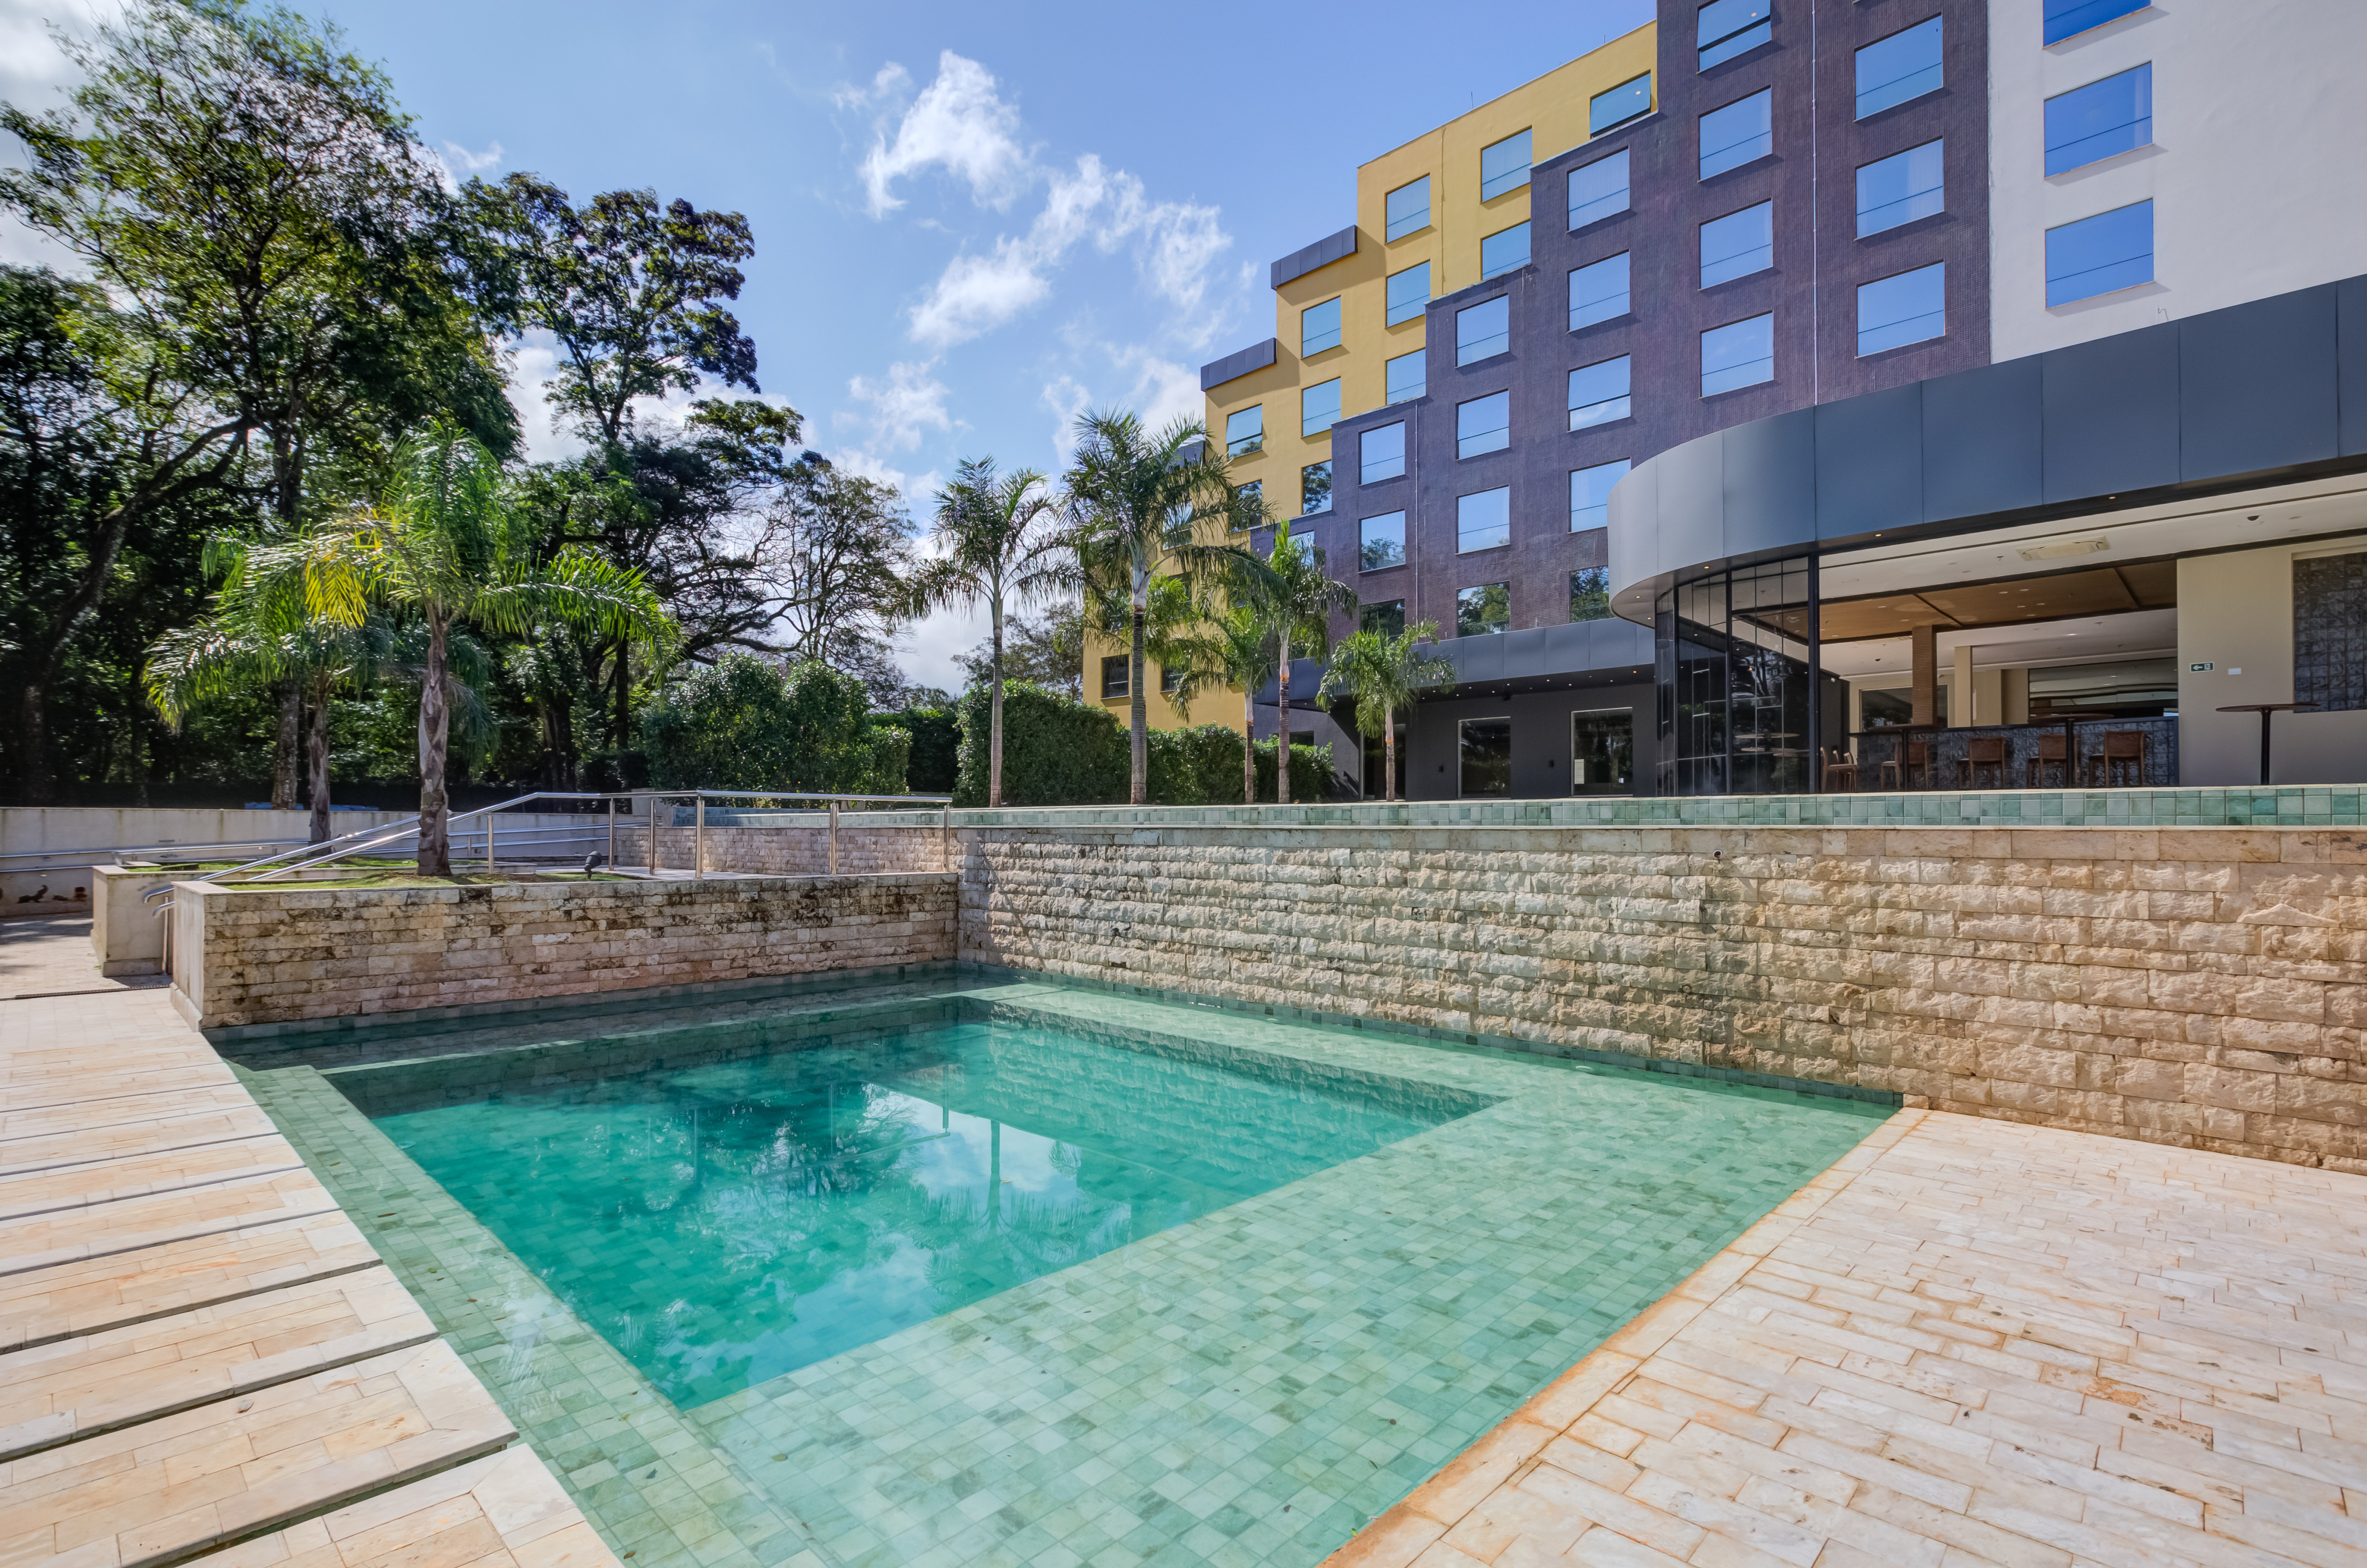 Outdoor small pool area and hotel building